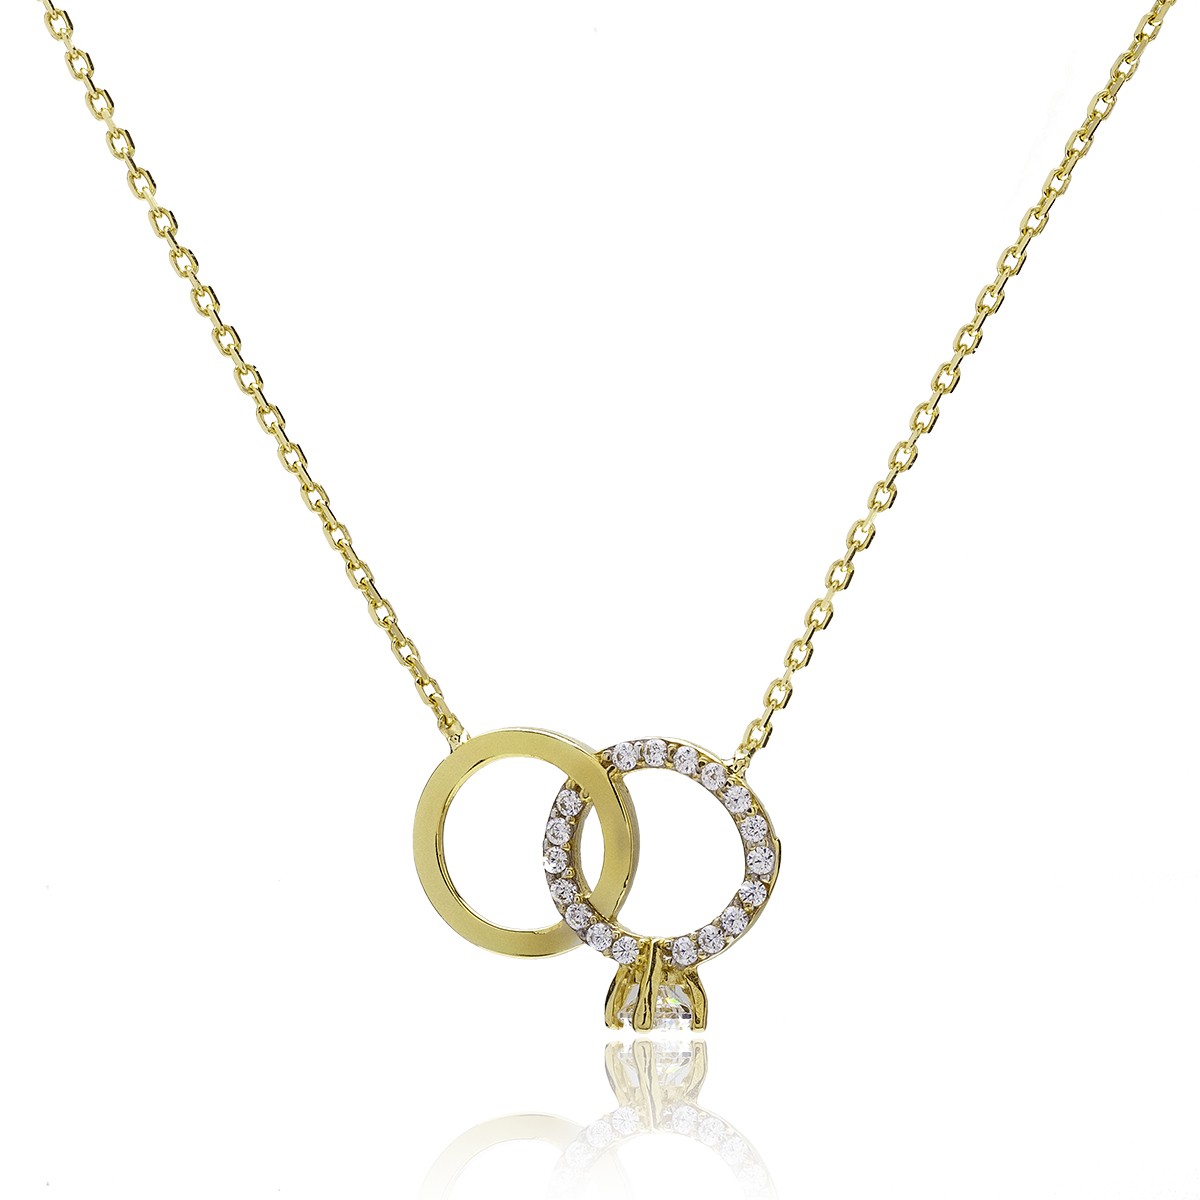 DOUBLE RINGS NECKLACE GOLD 14K